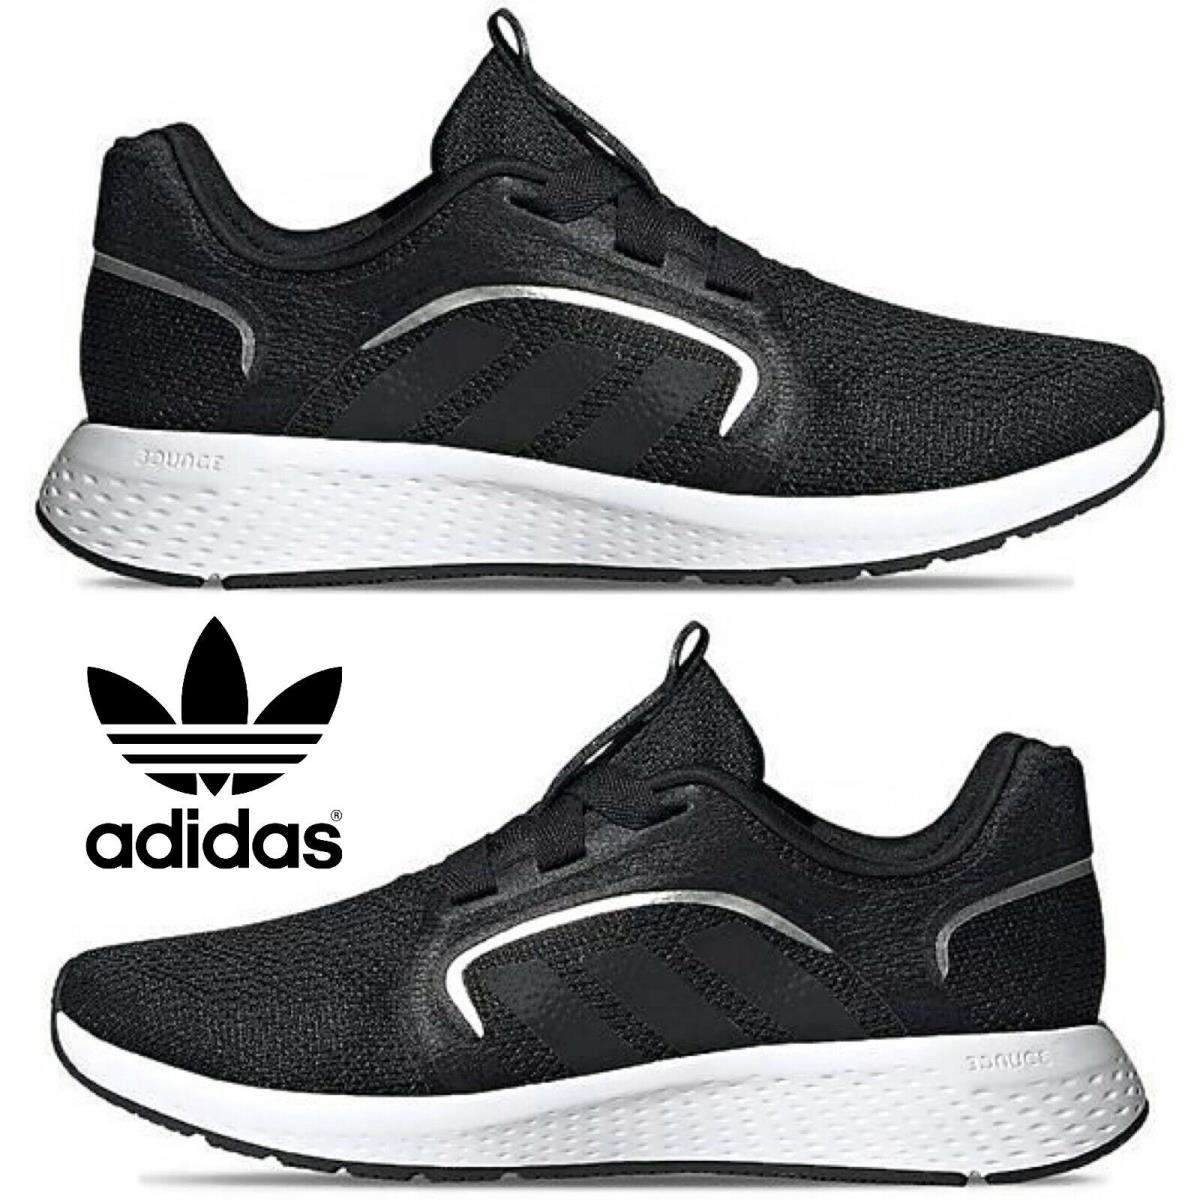 Adidas Edge Lux Women`s Sneakers Sport Running Gym Comfort Athletic Shoes